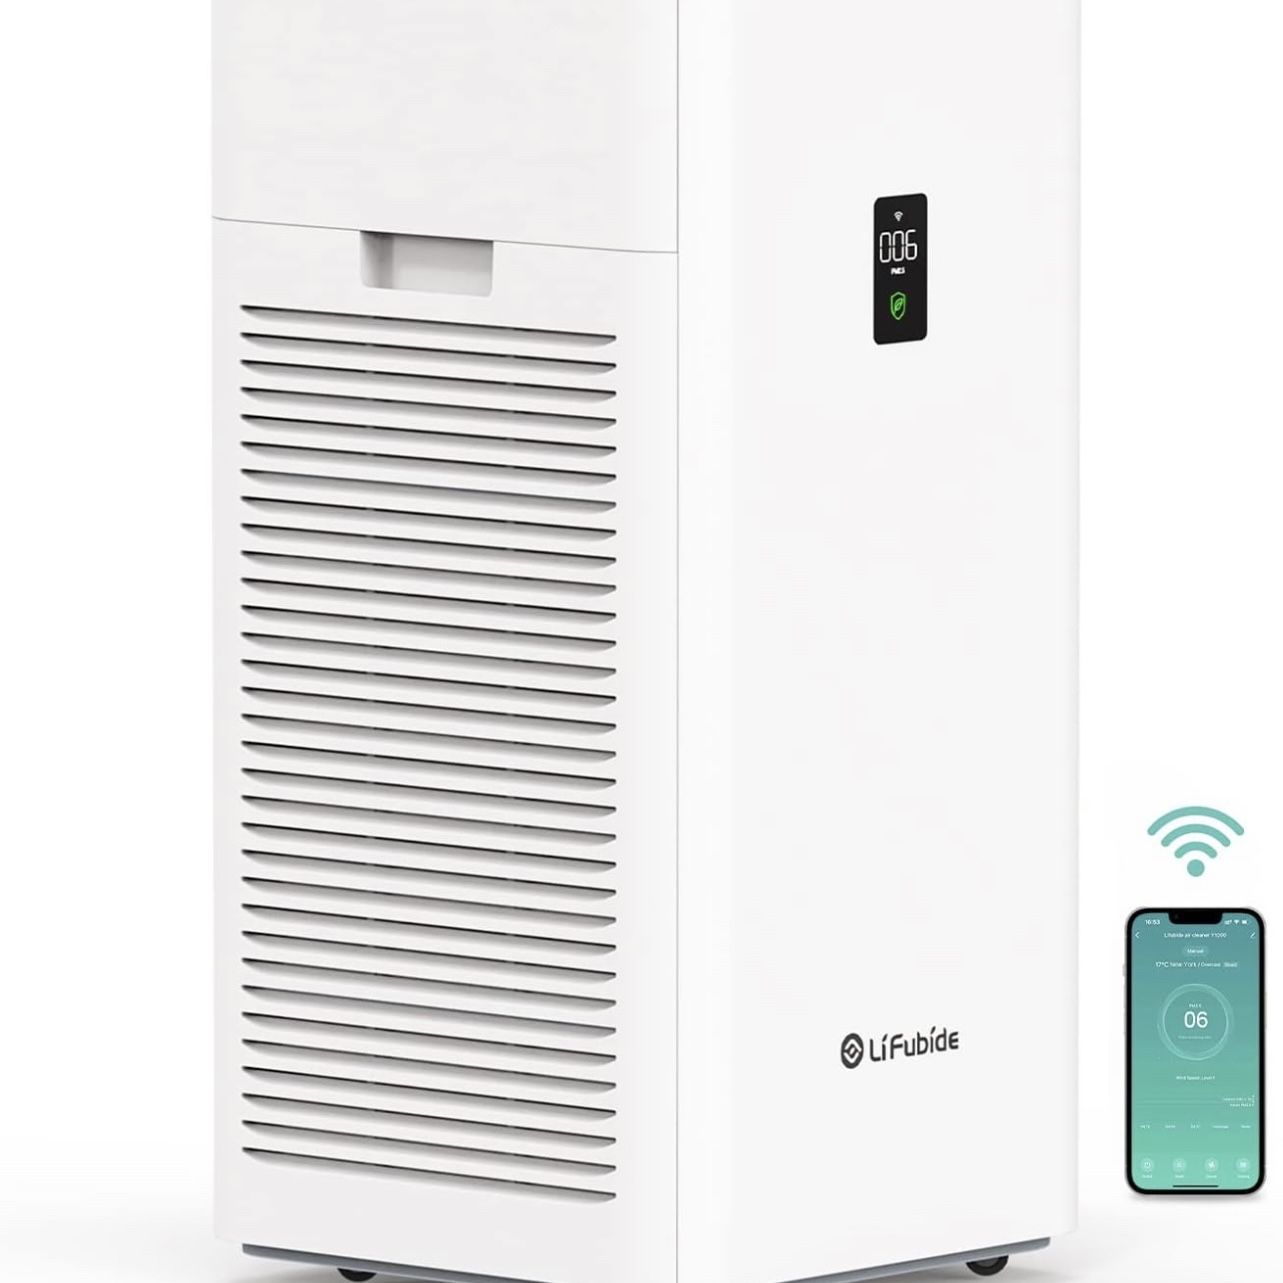 New Lifubide Large Room Air Purifier, H13 True HEPA,4555 Sq.Ft Coverage,24dB Low Noise For Bedroom,Removal Of 99.99% 0.01 Microns Particles, Pet Dande